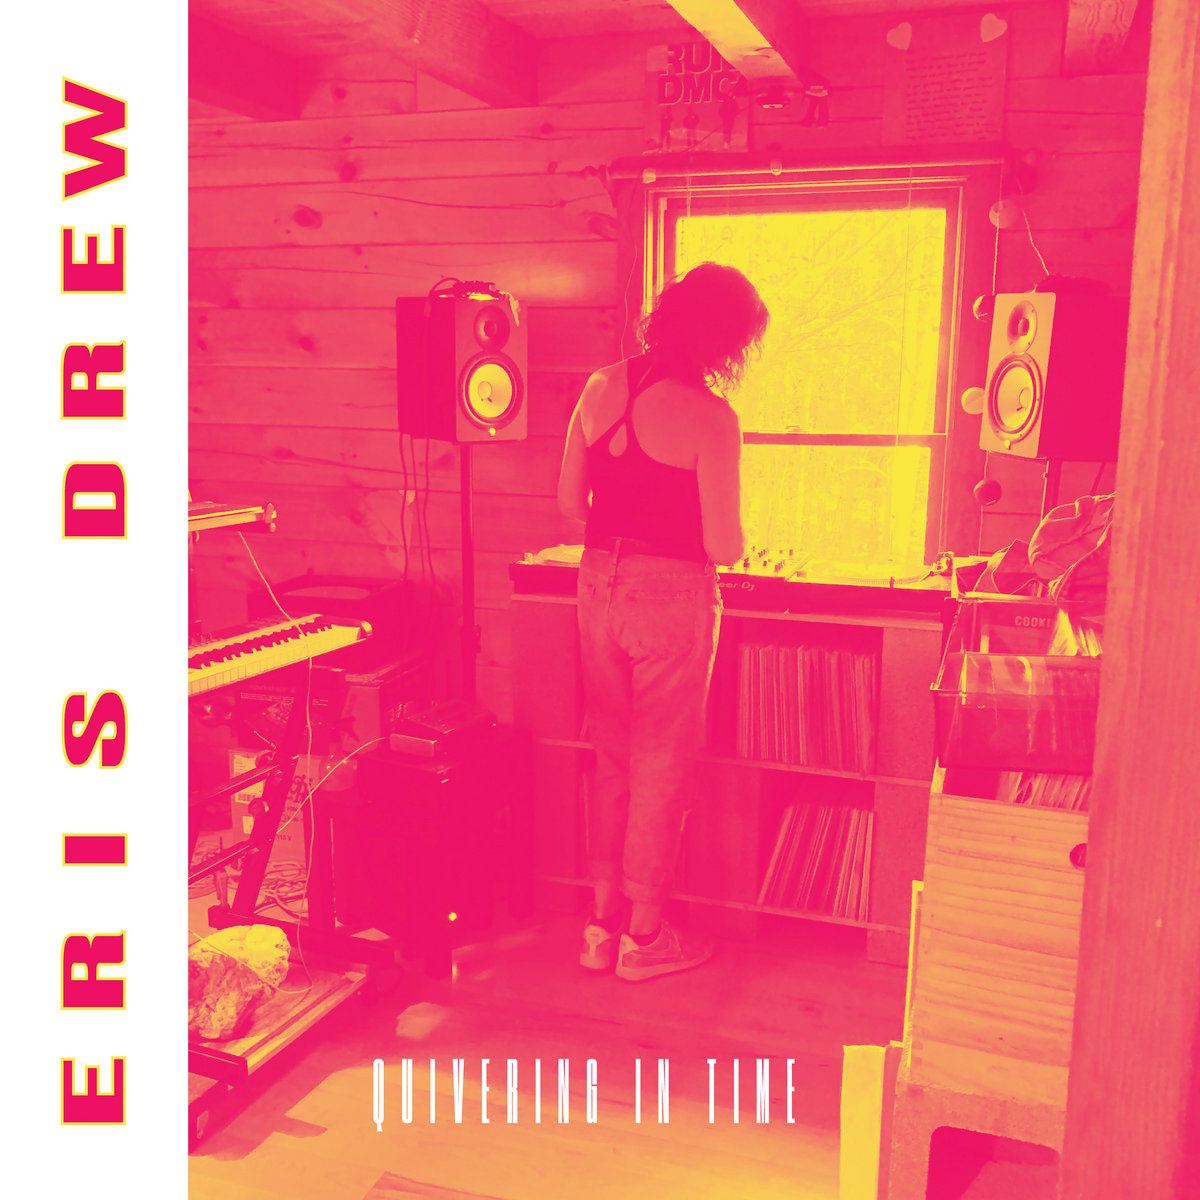 Eris Drew – Quivering in Time (T4T LUV NRG)